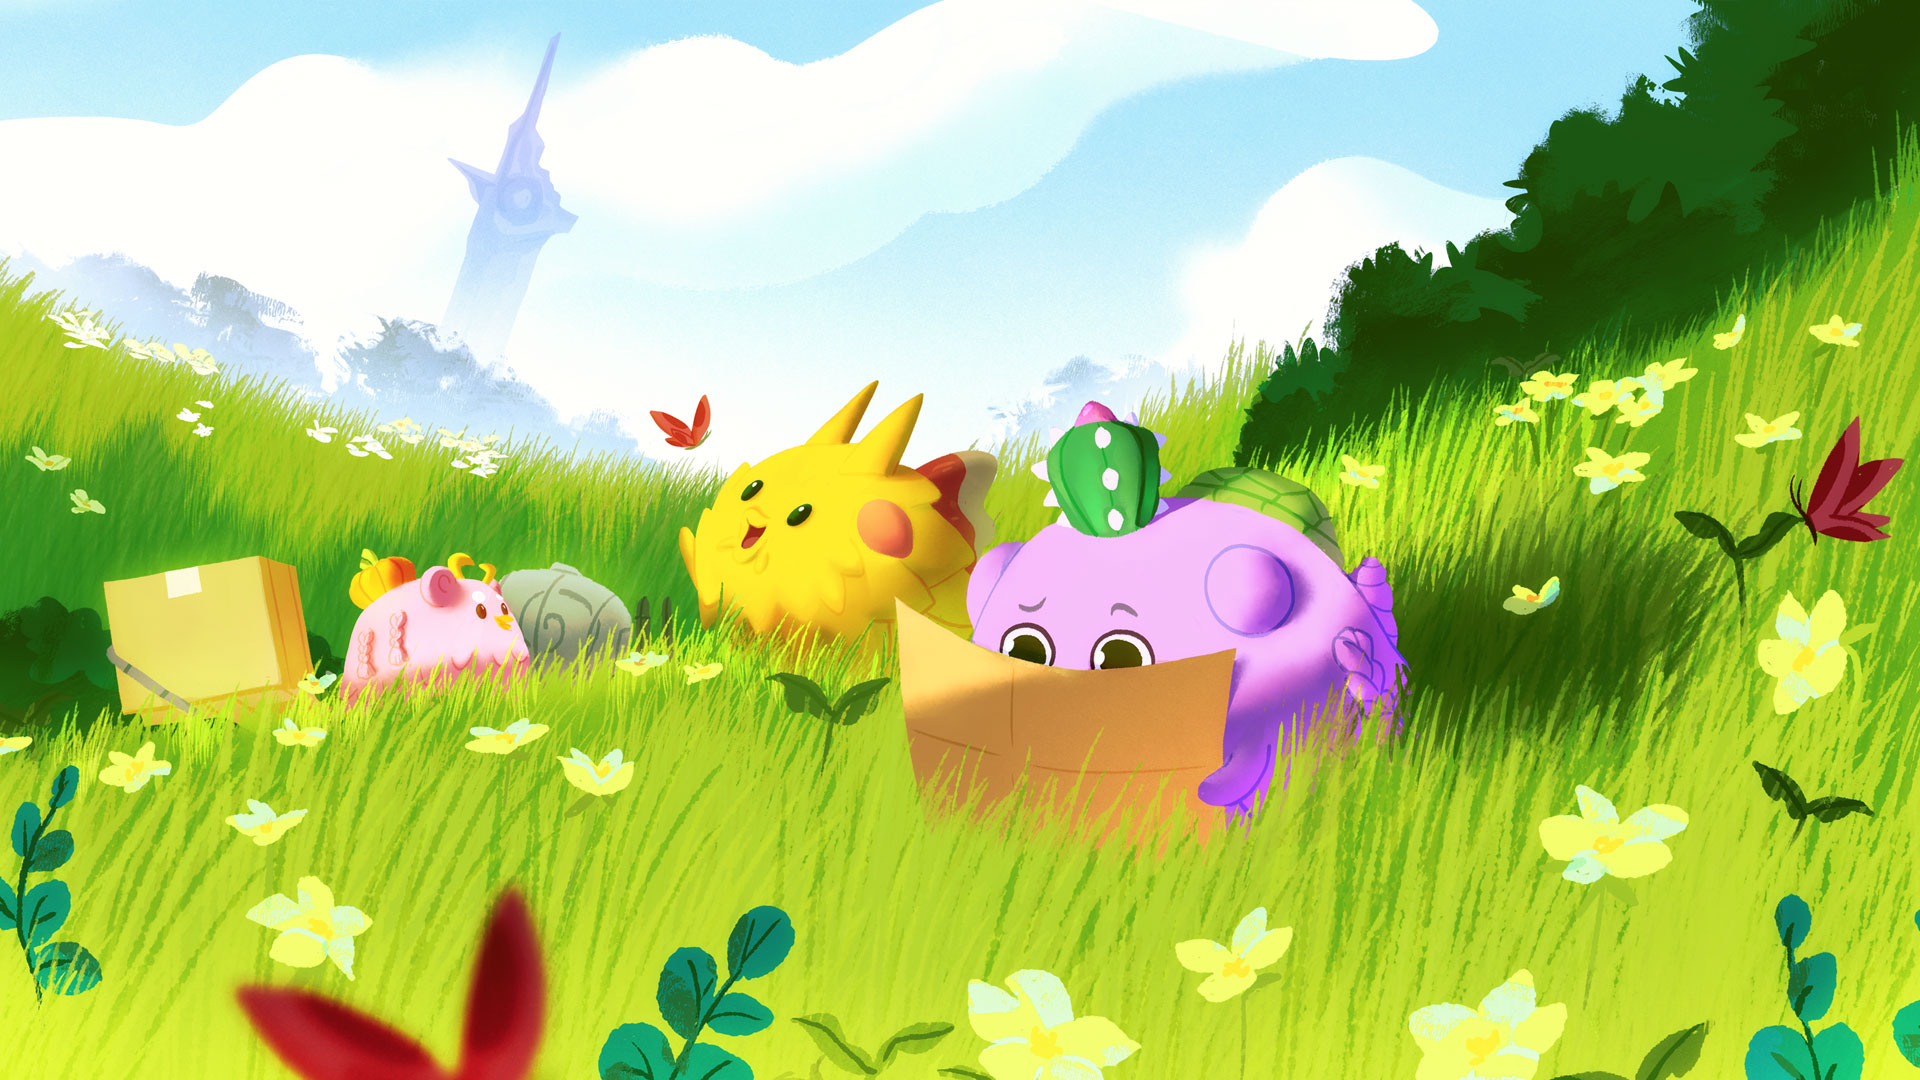 Axie Infinity’s founder talks about play-to-earn games driving adoption